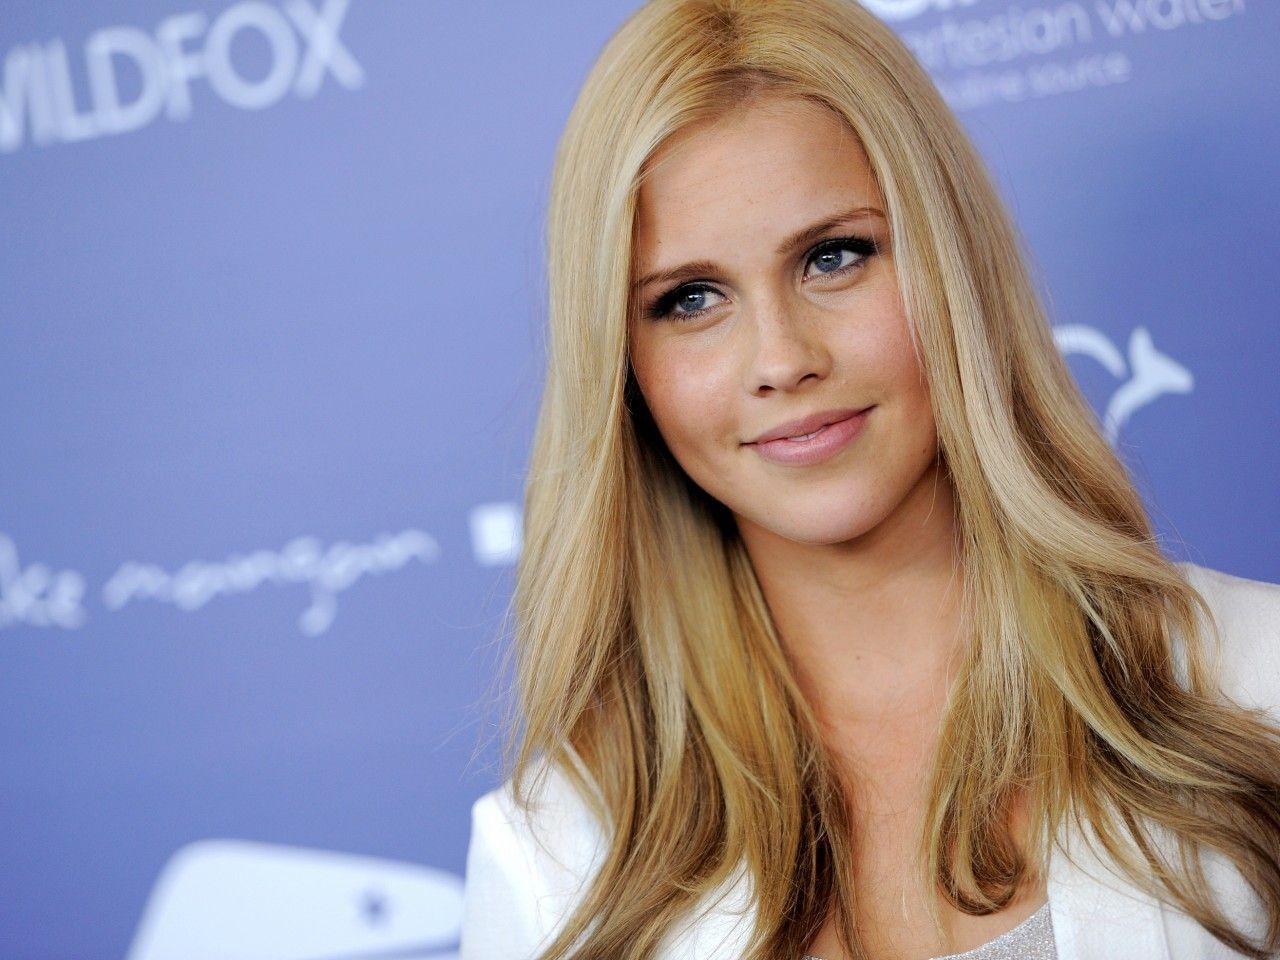 Wallpaper for Claire Holt › Resolution 1280x960px